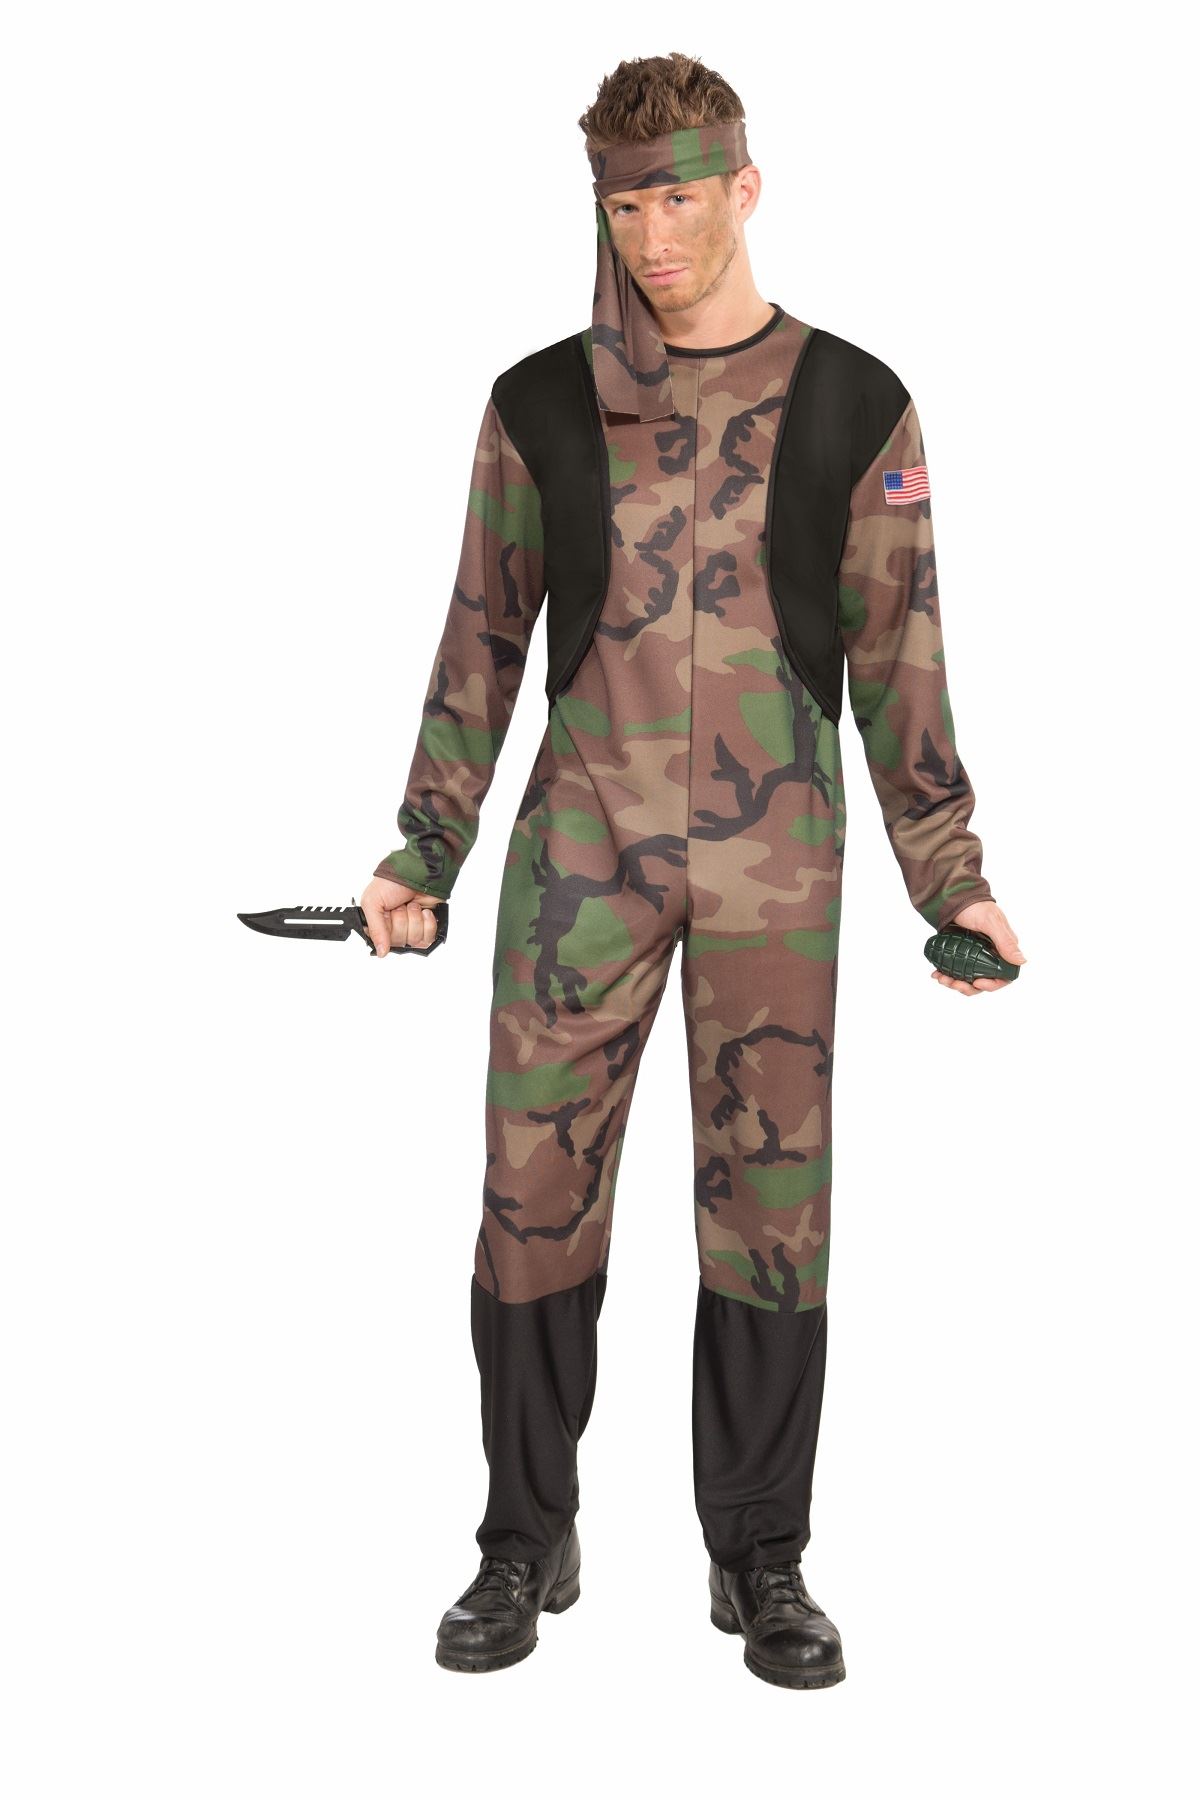 Army Soldier Men Costume Adult Military Outfit Force Halloween Dress up | eBay